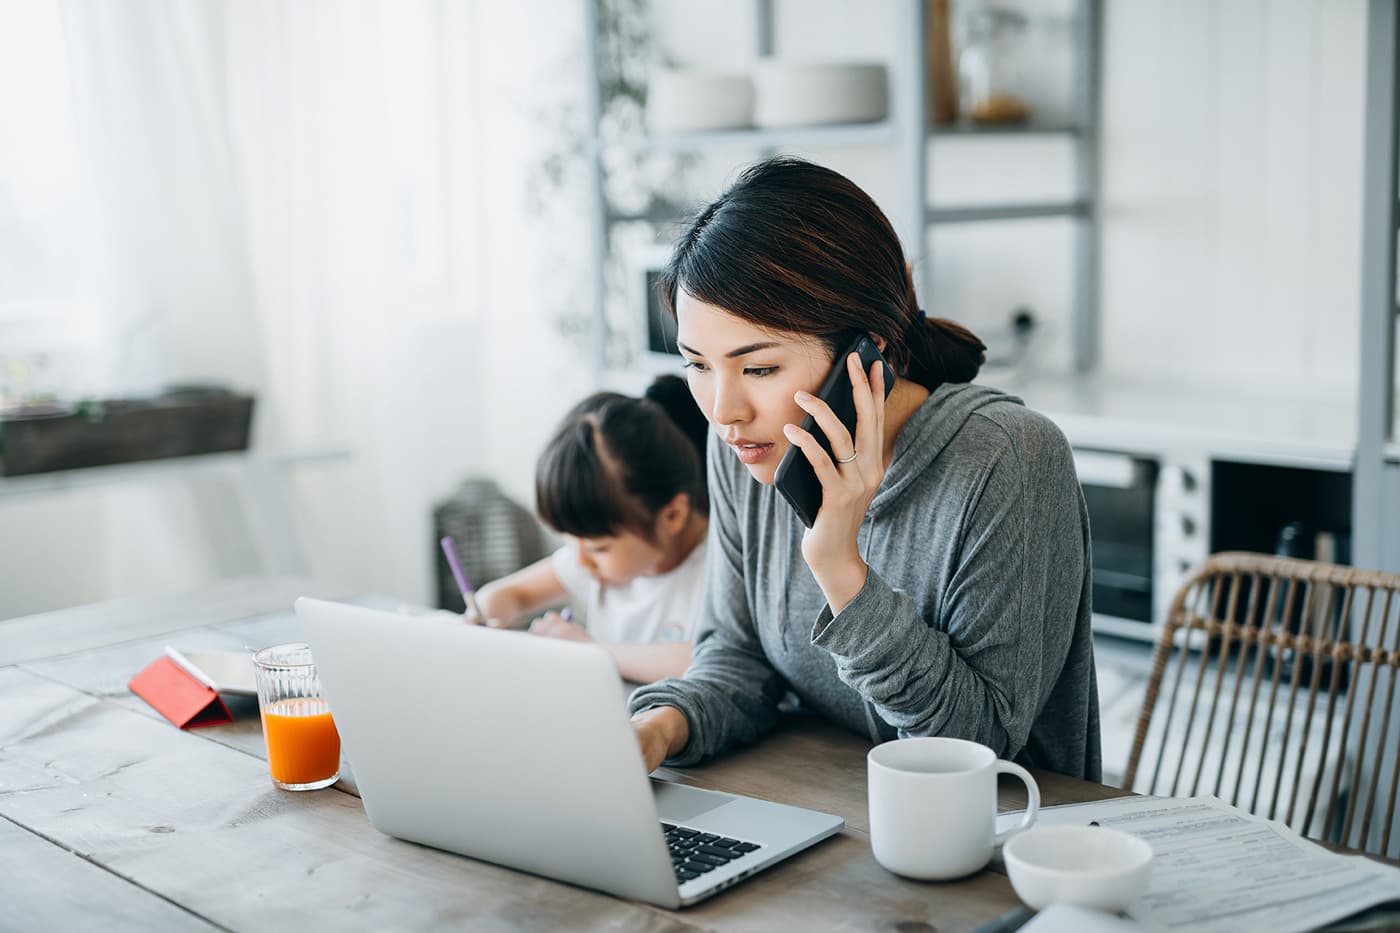 Woman on the phone while at her computer while child plays in the background